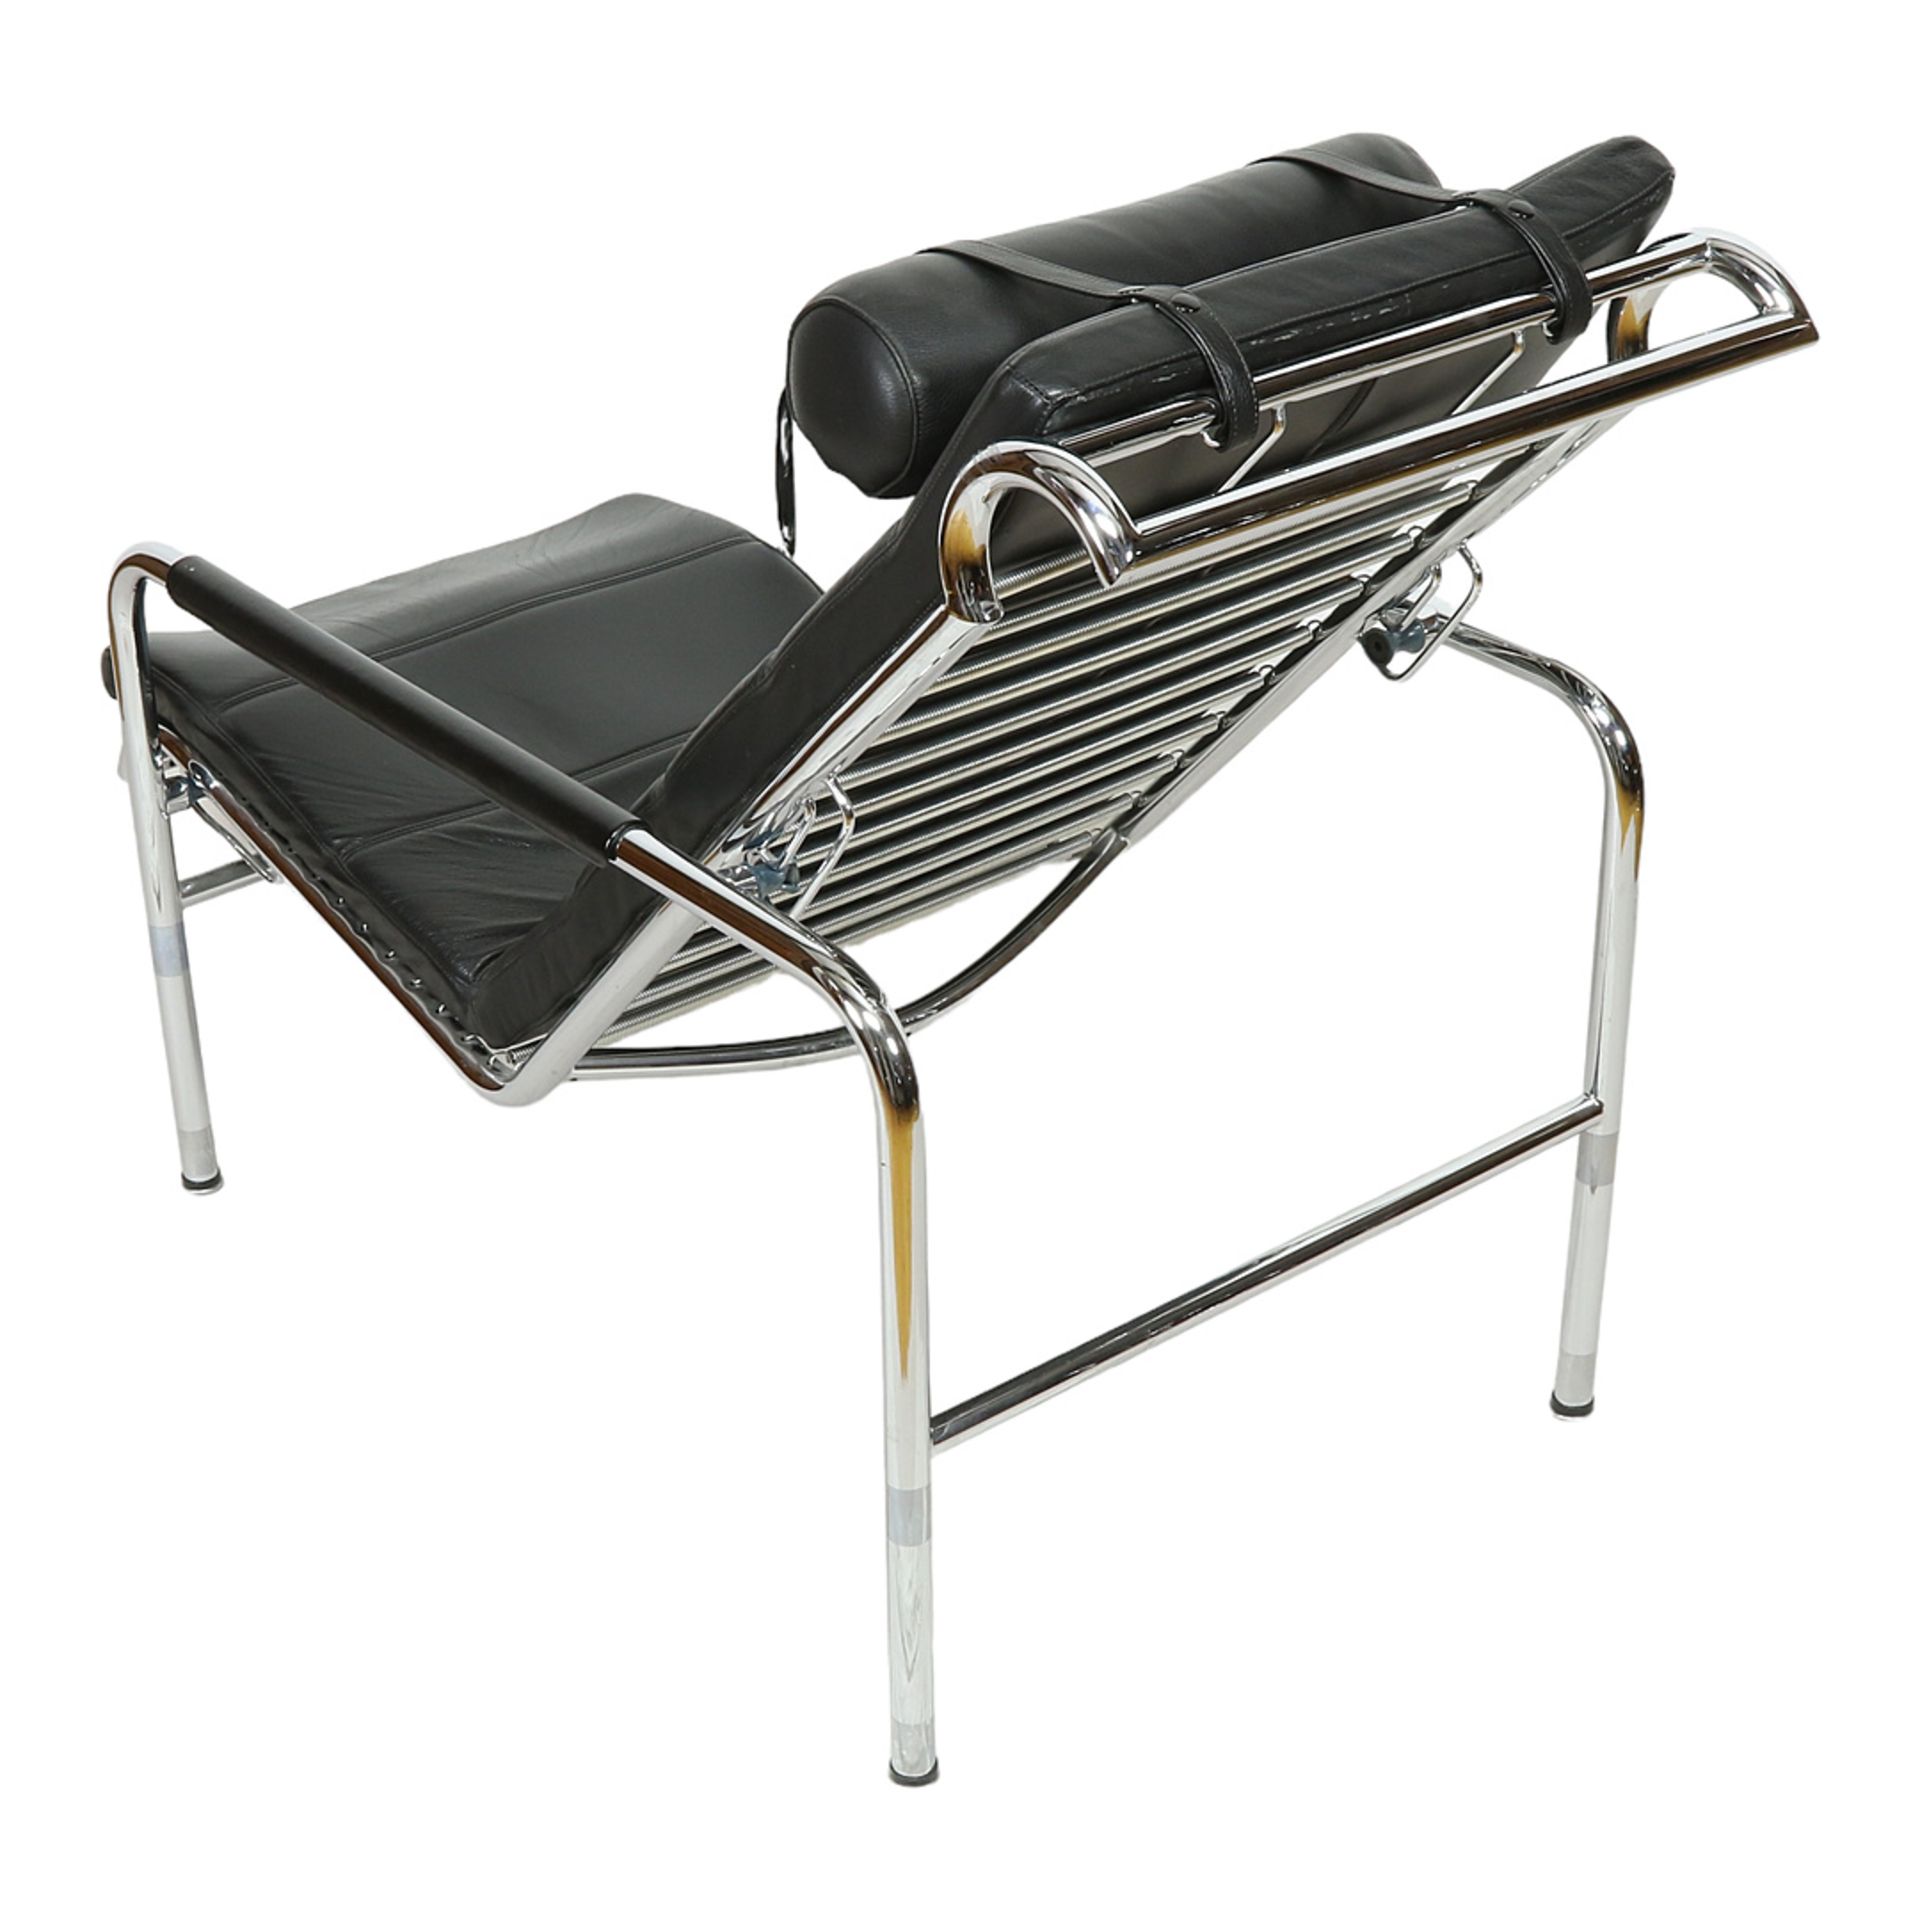 Chaise longue with stool, chrome-plated steel, black leather cover - Image 5 of 9